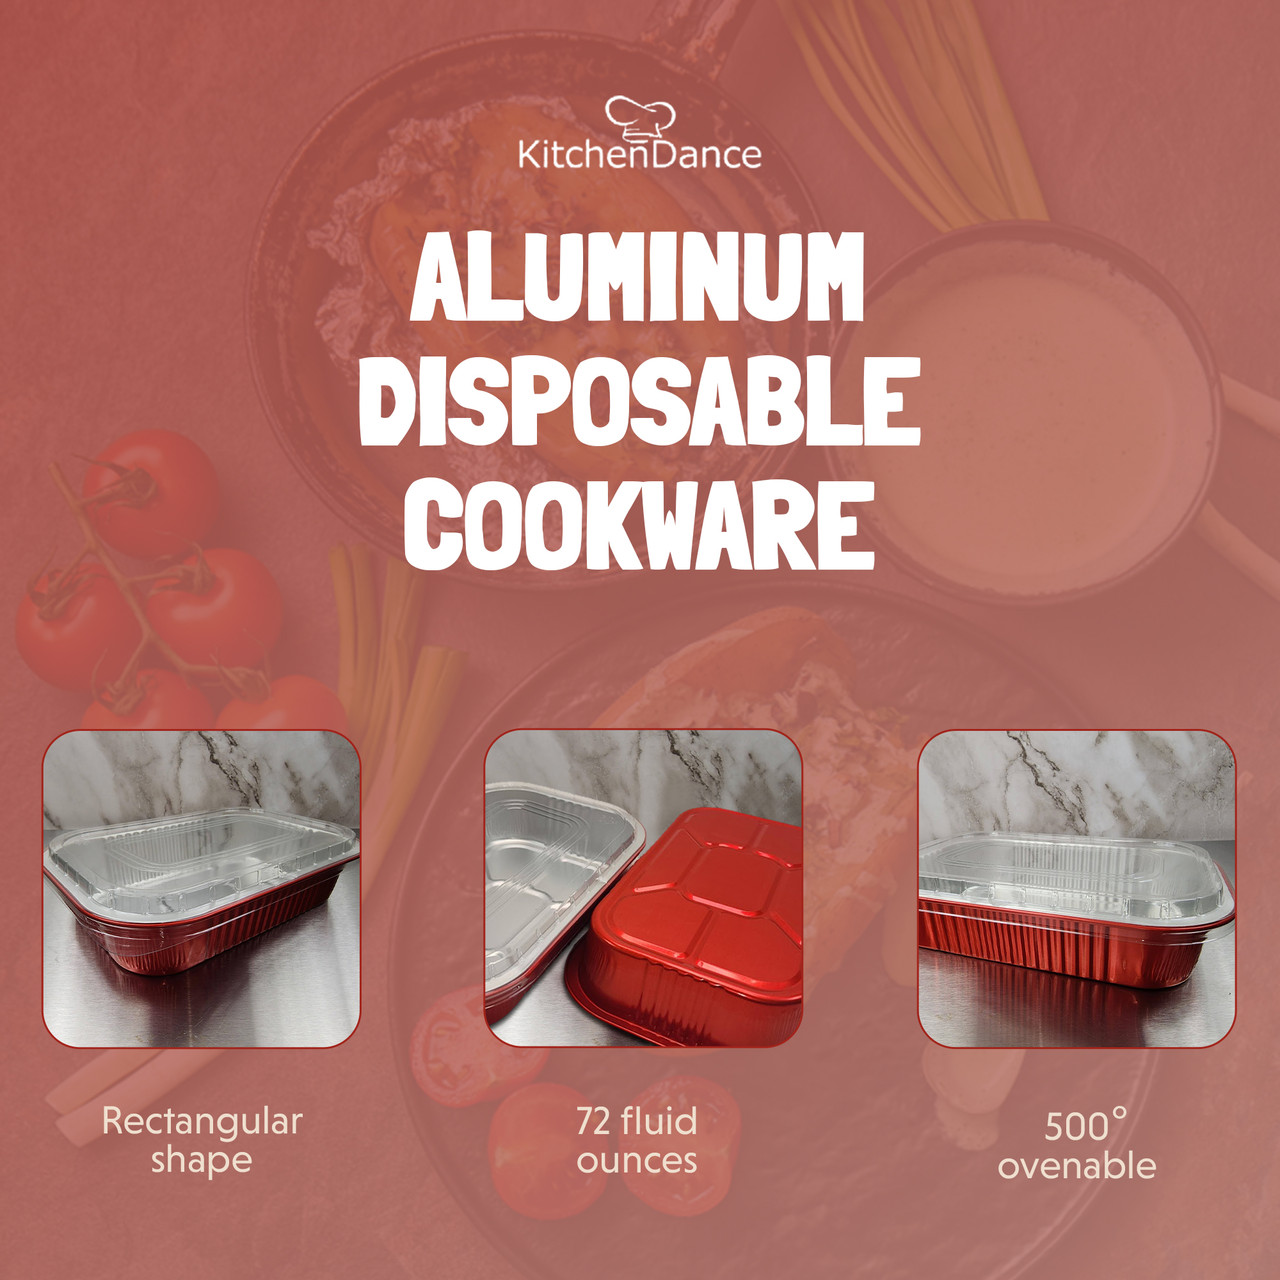 11X7 Disposable Aluminum Pans with Covers - 10 Pack - Pan with Foil Lids  Perfect